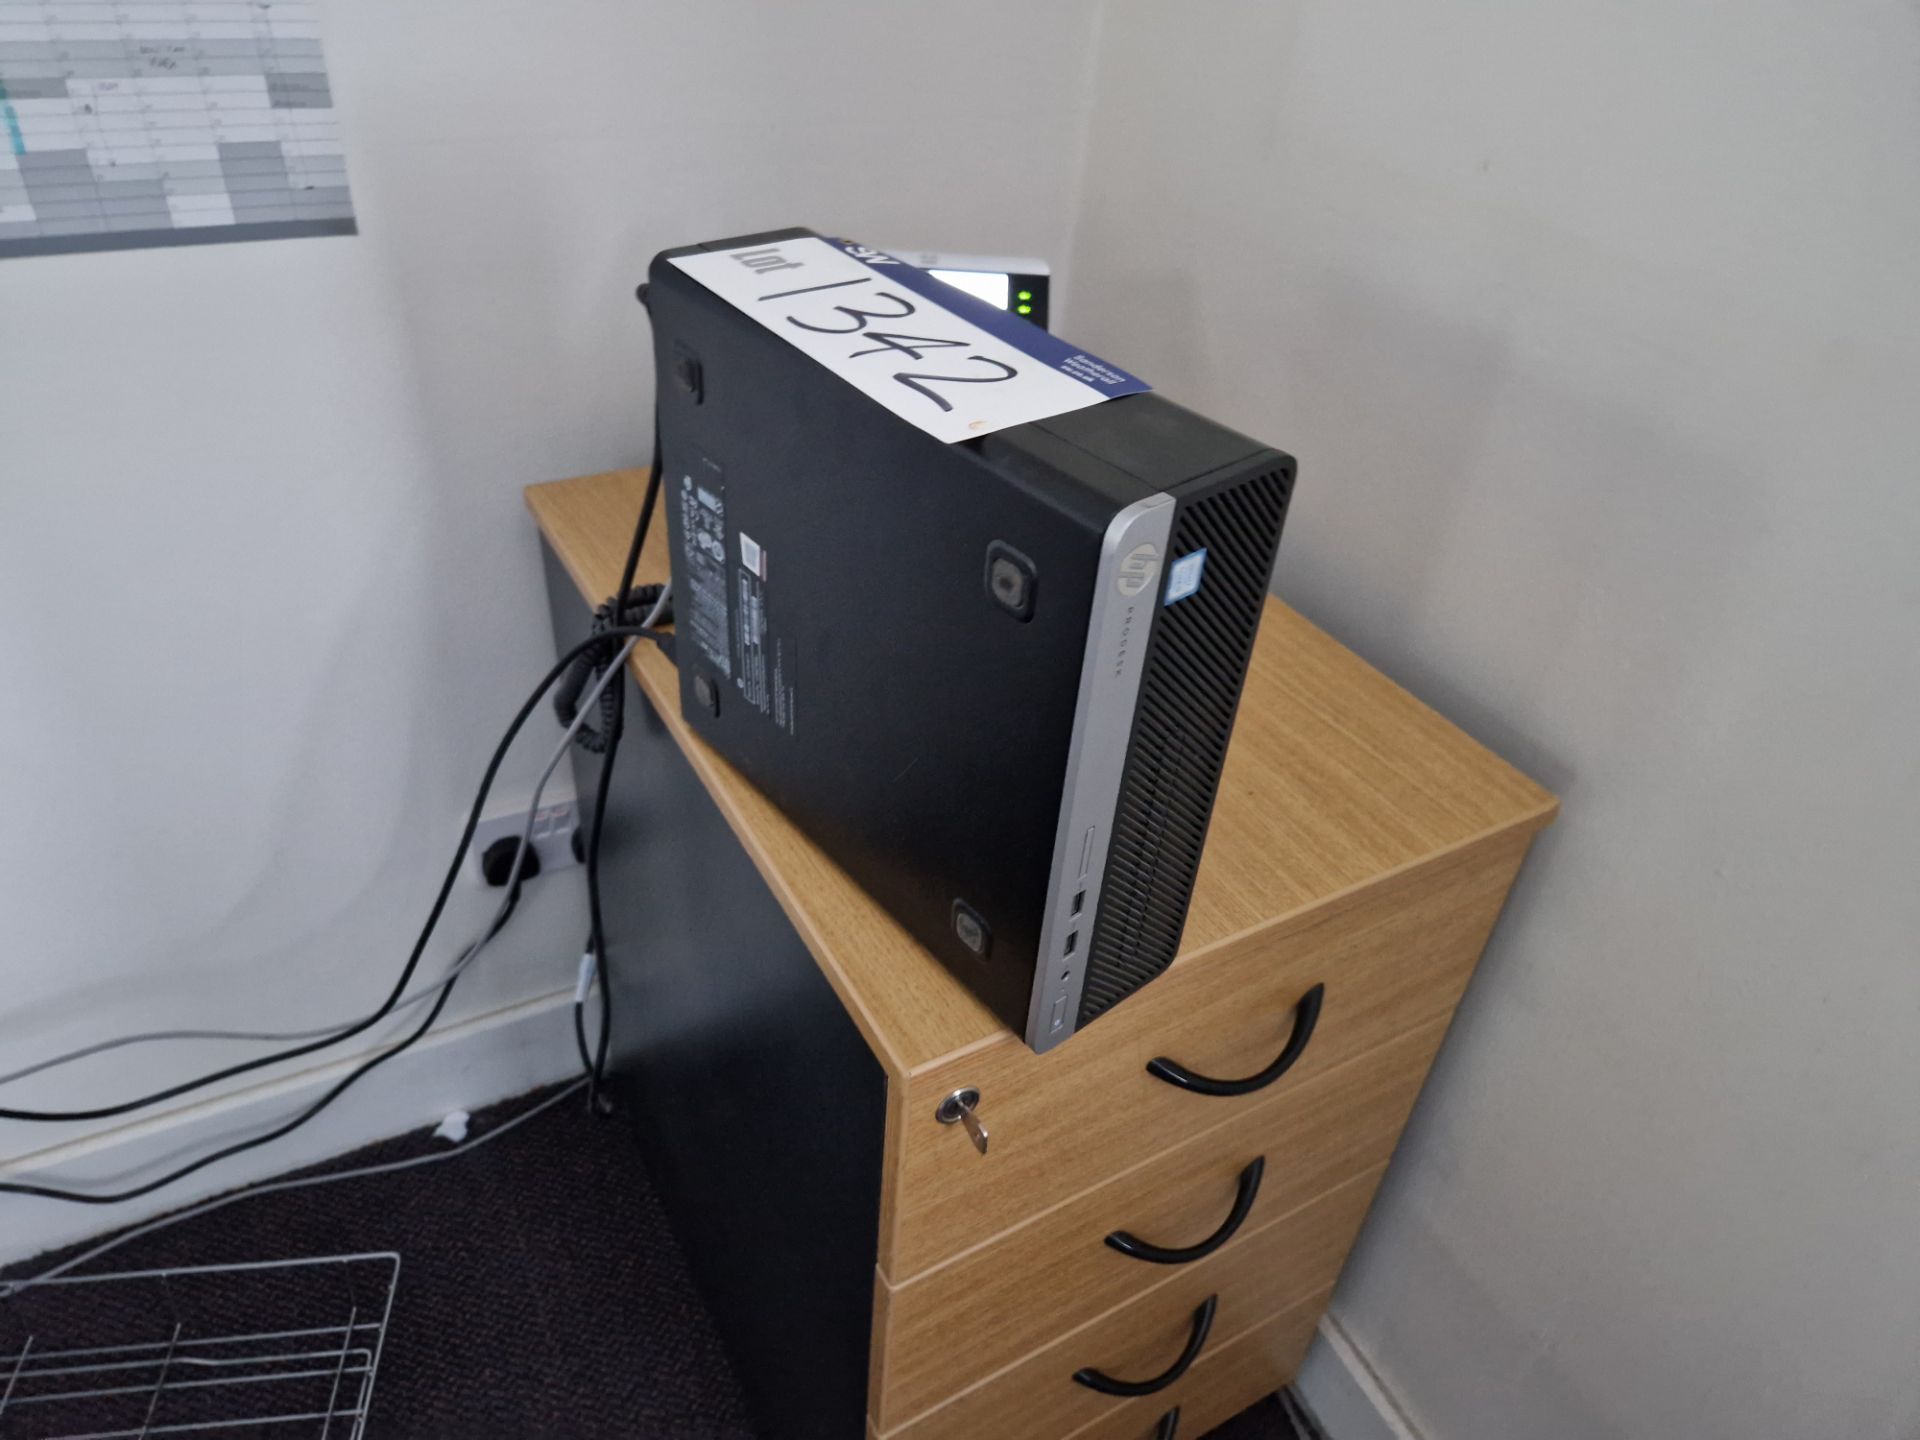 HP Prodesk Core i5 Desktop PC, Monitor, Keyboard and Mouse (Hard Drive Removed) Please read the